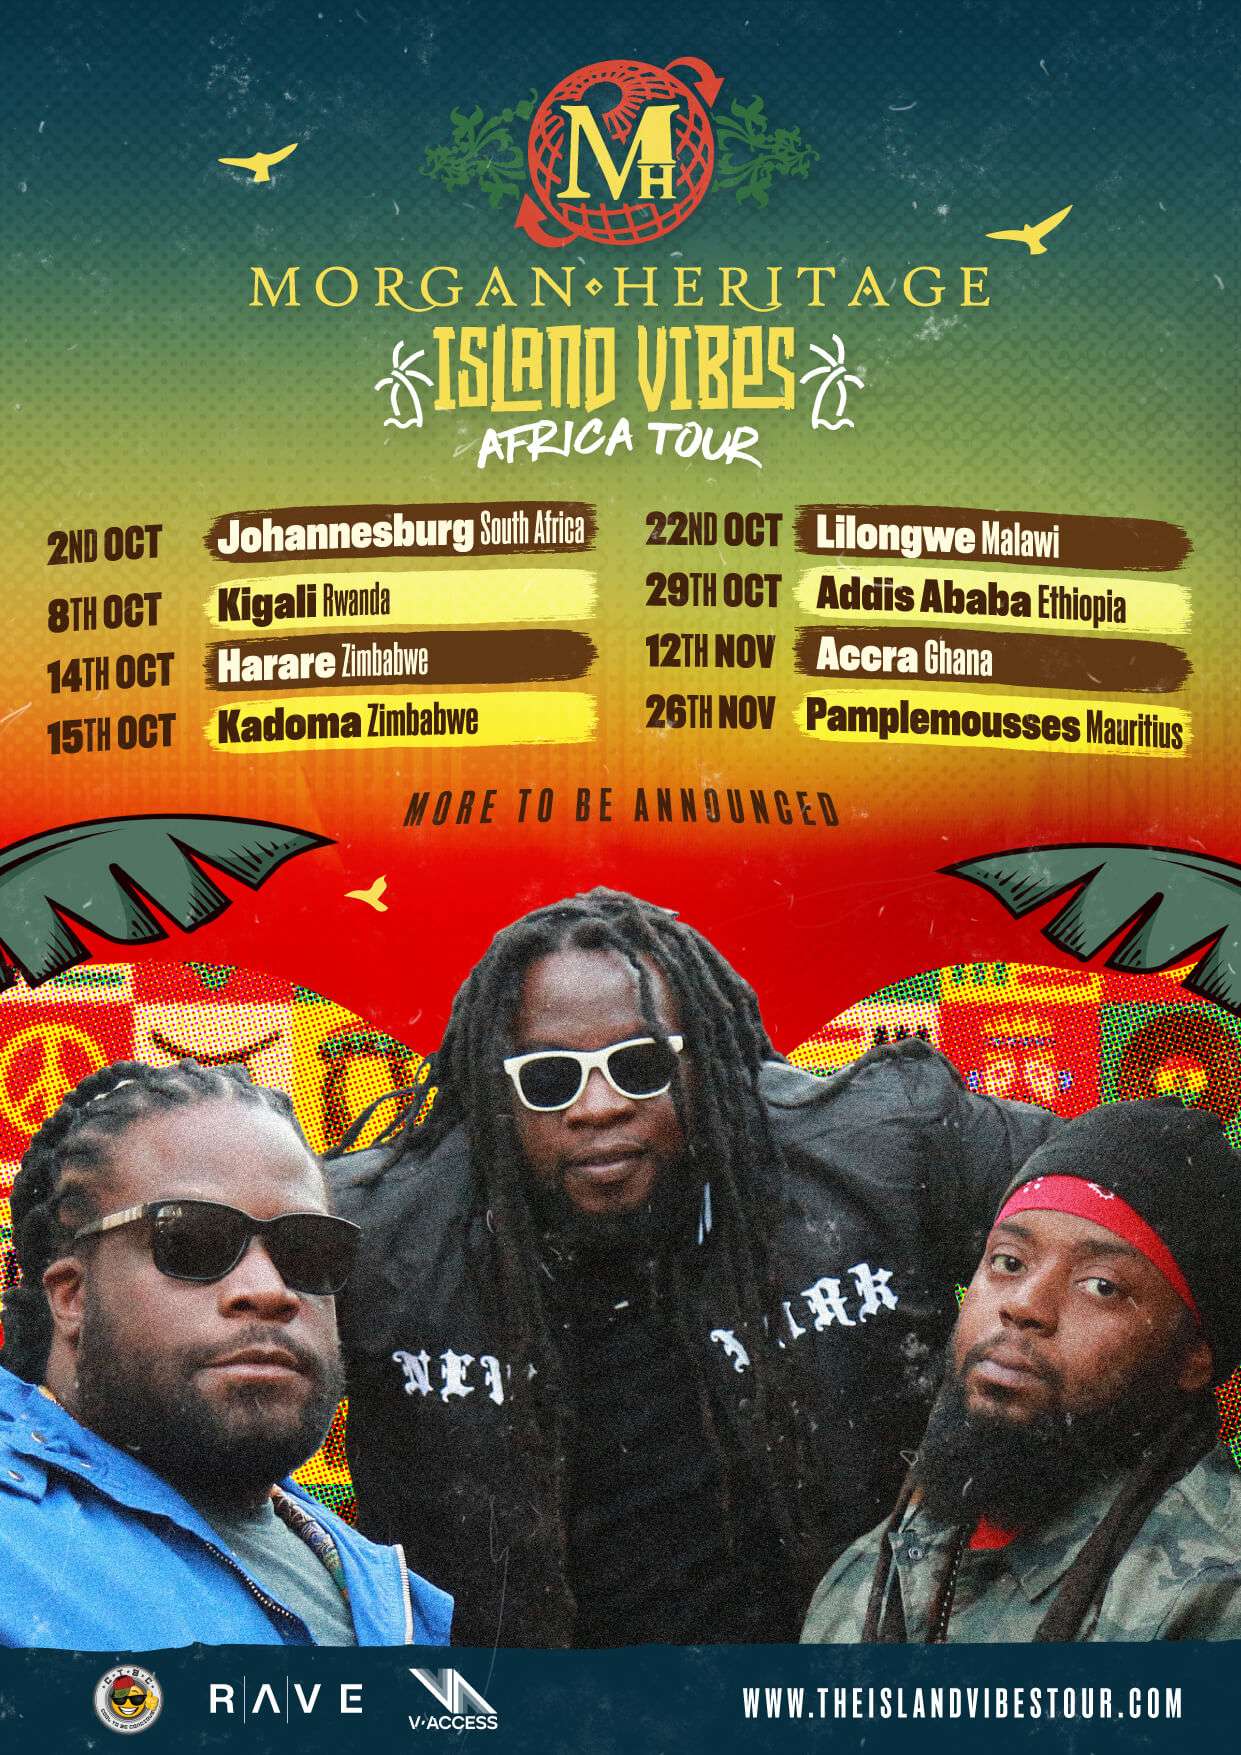 Grammy Award-Winning Reggae Band Morgan Heritage announces their First Full-Scale African Tour! 